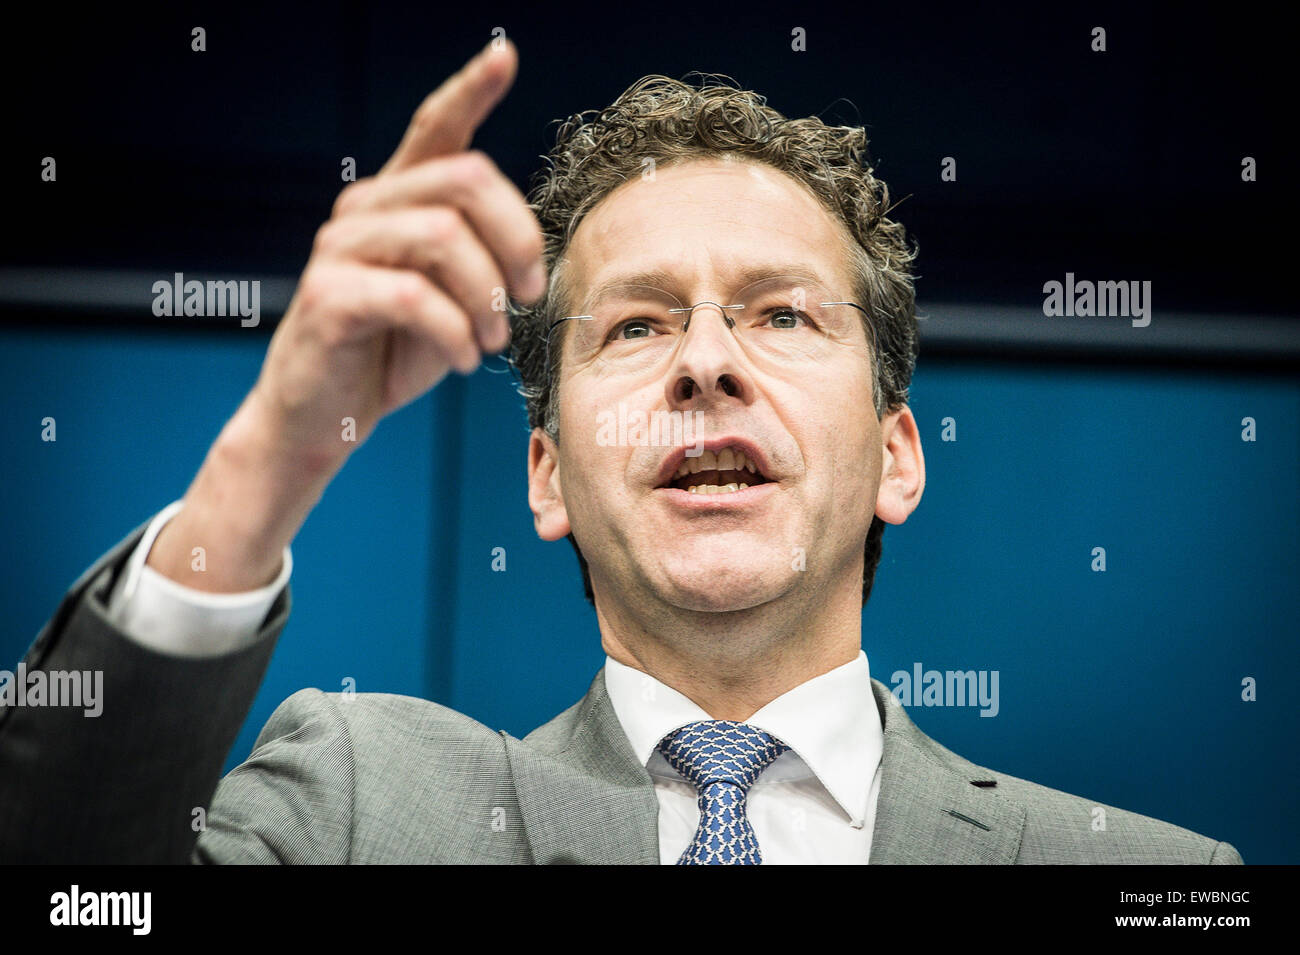 Brussels, Belgium. 22nd June, 2015. Eurogroup President Dutch Finance Minister Jeroen Dijsselbloem holds a press conference after a special Eurogroup finance ministers meeting on Greece at European Council headquarters in Brussels, Belgium on 22.06.2015 Heads of Eurozone state will geather for emergency summit on Greek debt today in EU headquarters Credit:  dpa picture alliance/Alamy Live News Stock Photo